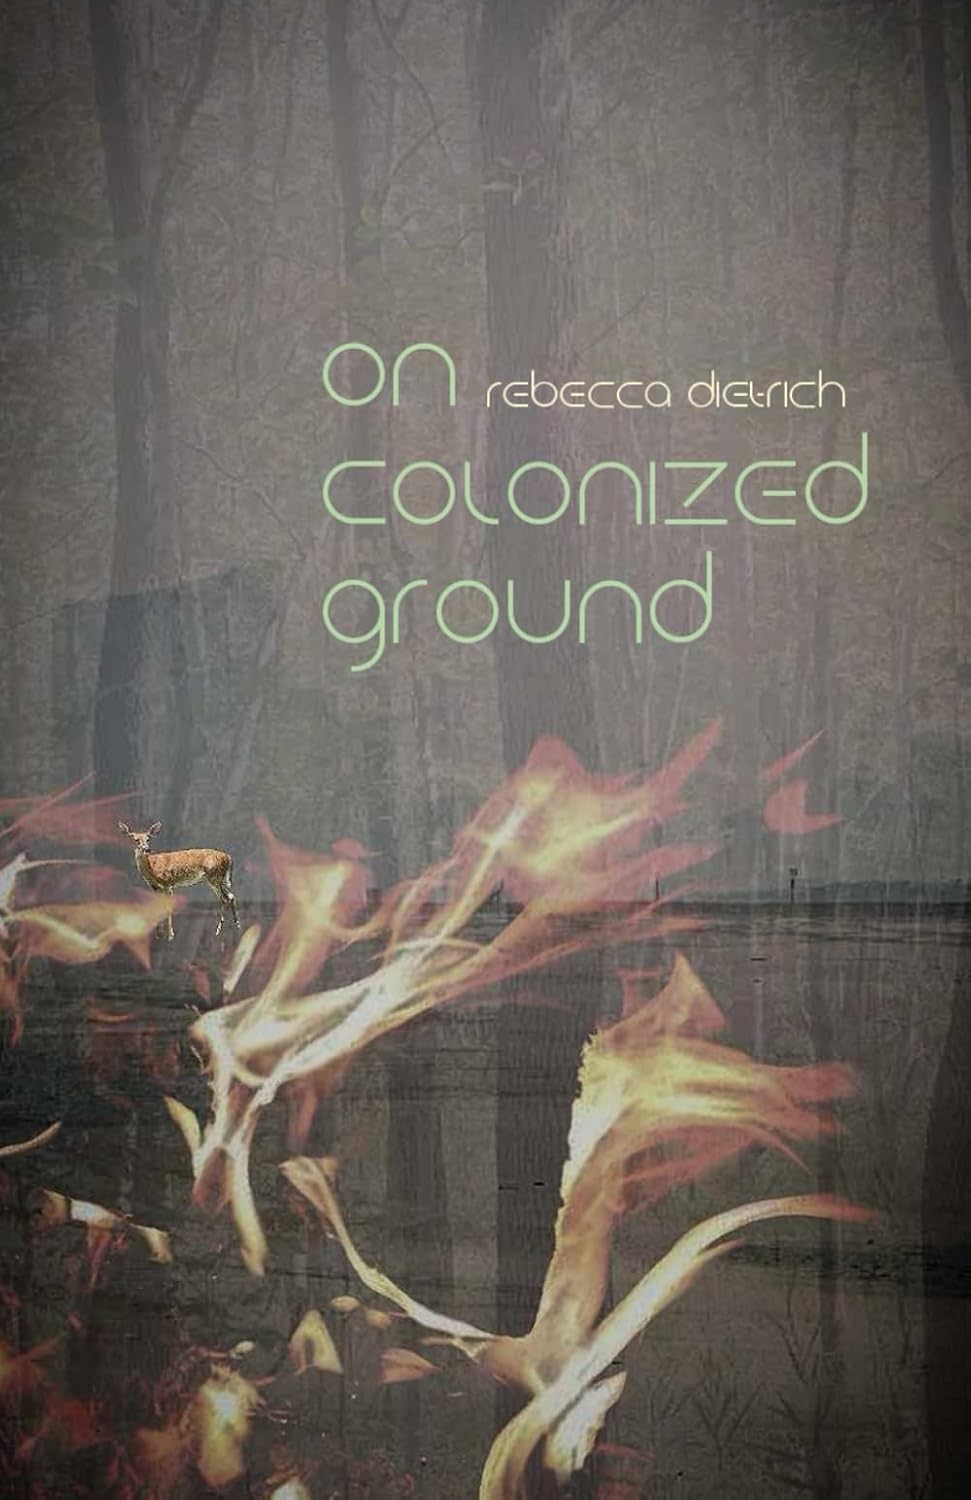 Award-Winning Poet Rebecca Dietrich Confronts Colonial Trauma in New Collection "On Colonized Ground"